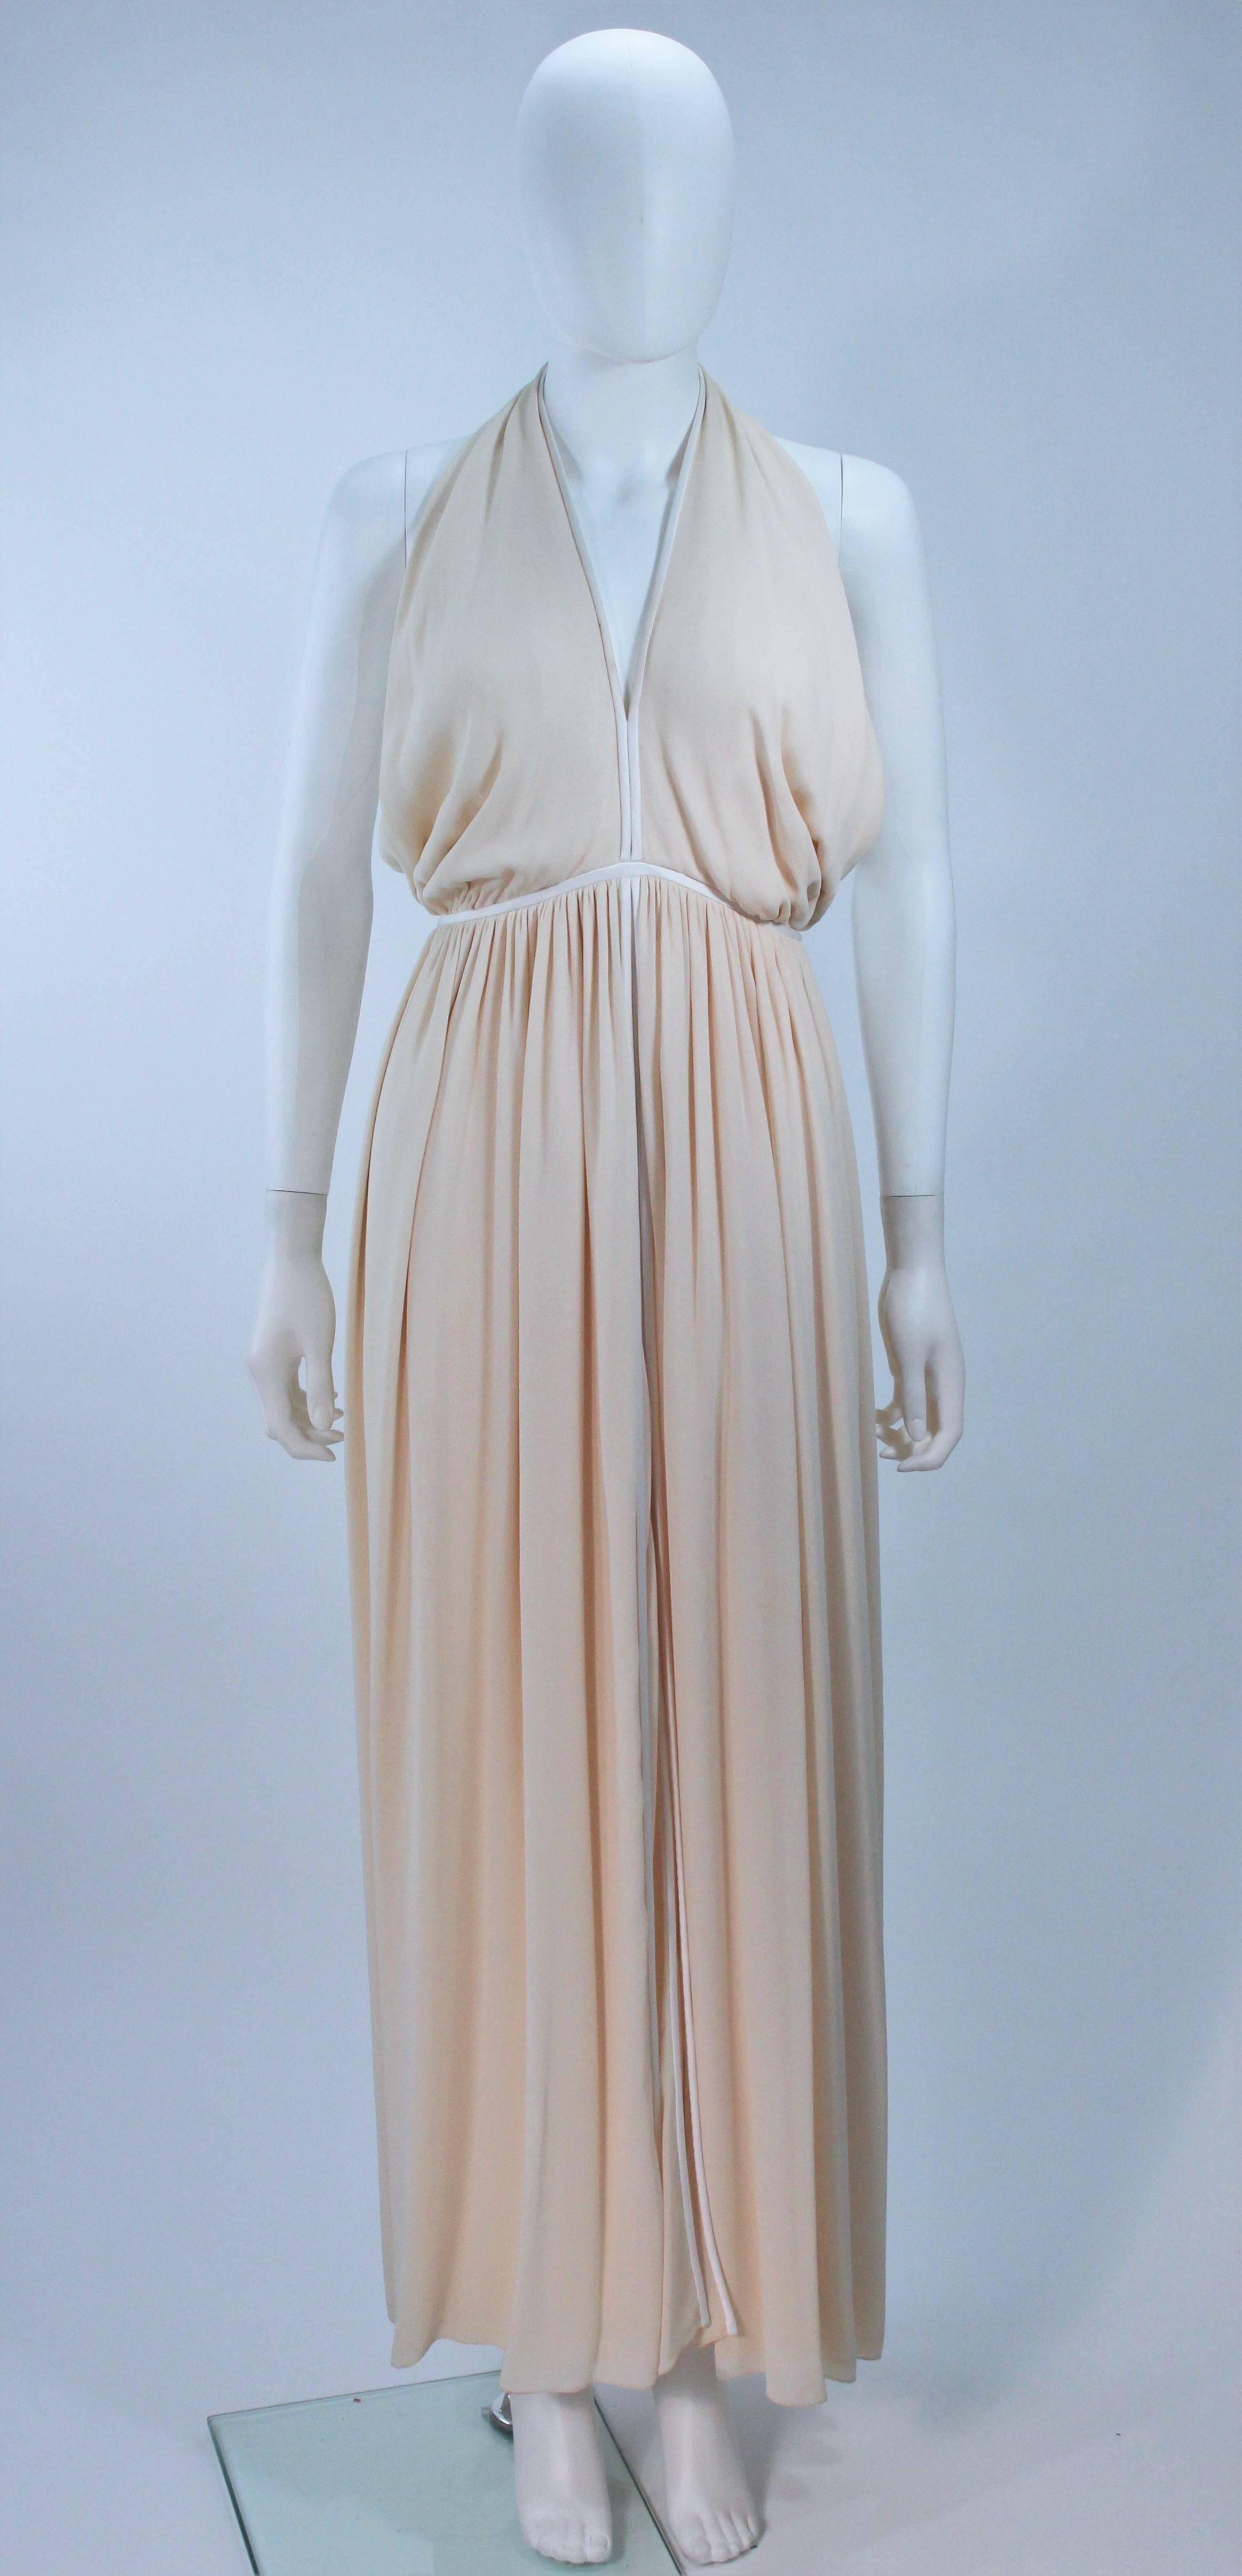  This Galanos  gown is composed of cream and ivory silk. Features a center front slit. There is a center back zipper closure. In excellent vintage condition. 

  **Please cross-reference measurements for personal accuracy. Size in description box